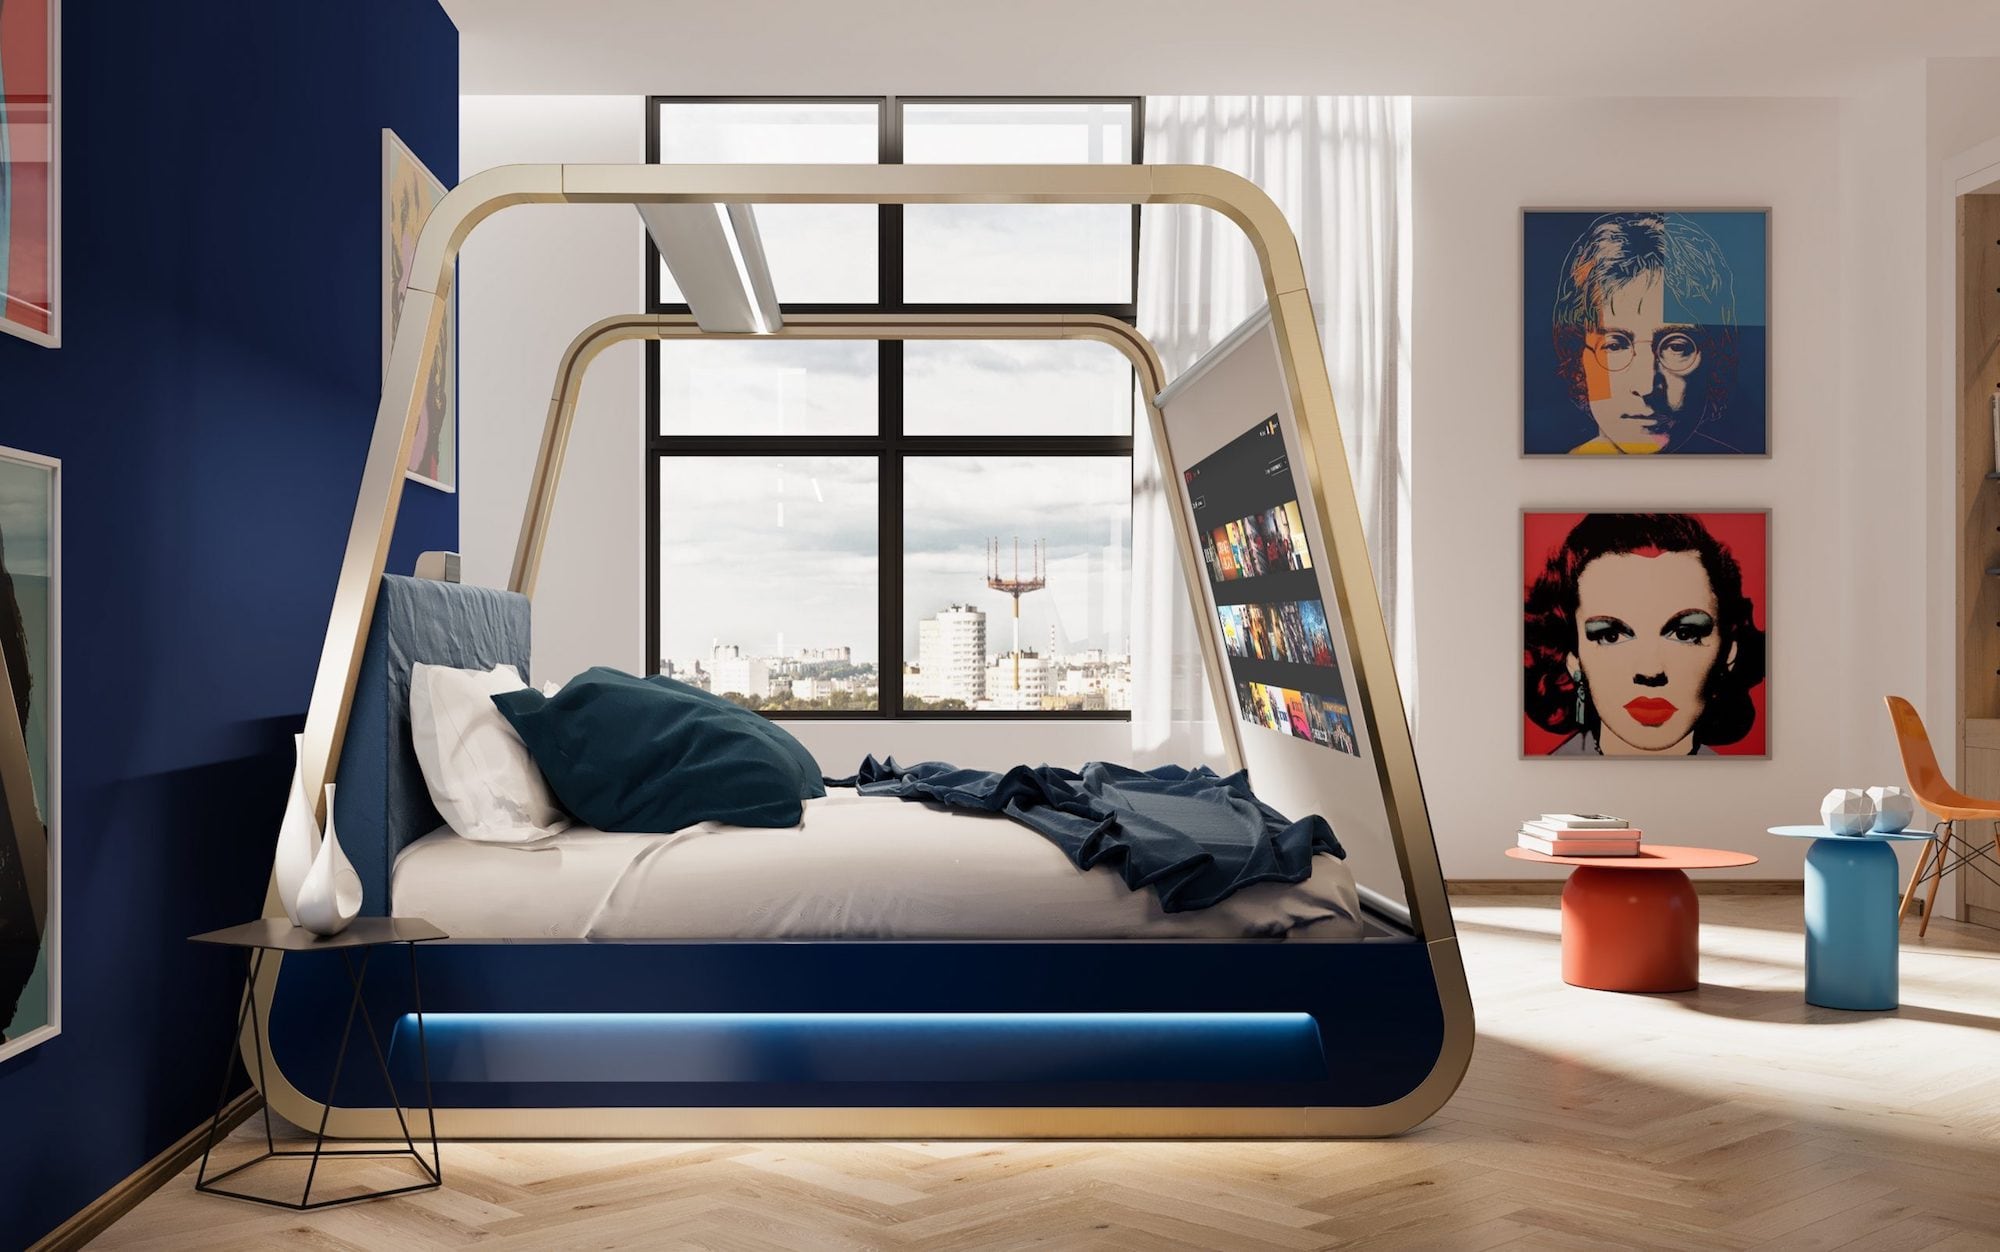 https://thegadgetflow.com/wp-content/uploads/2021/03/Mind-blowing-gadgets-for-your-bedroom.jpeg